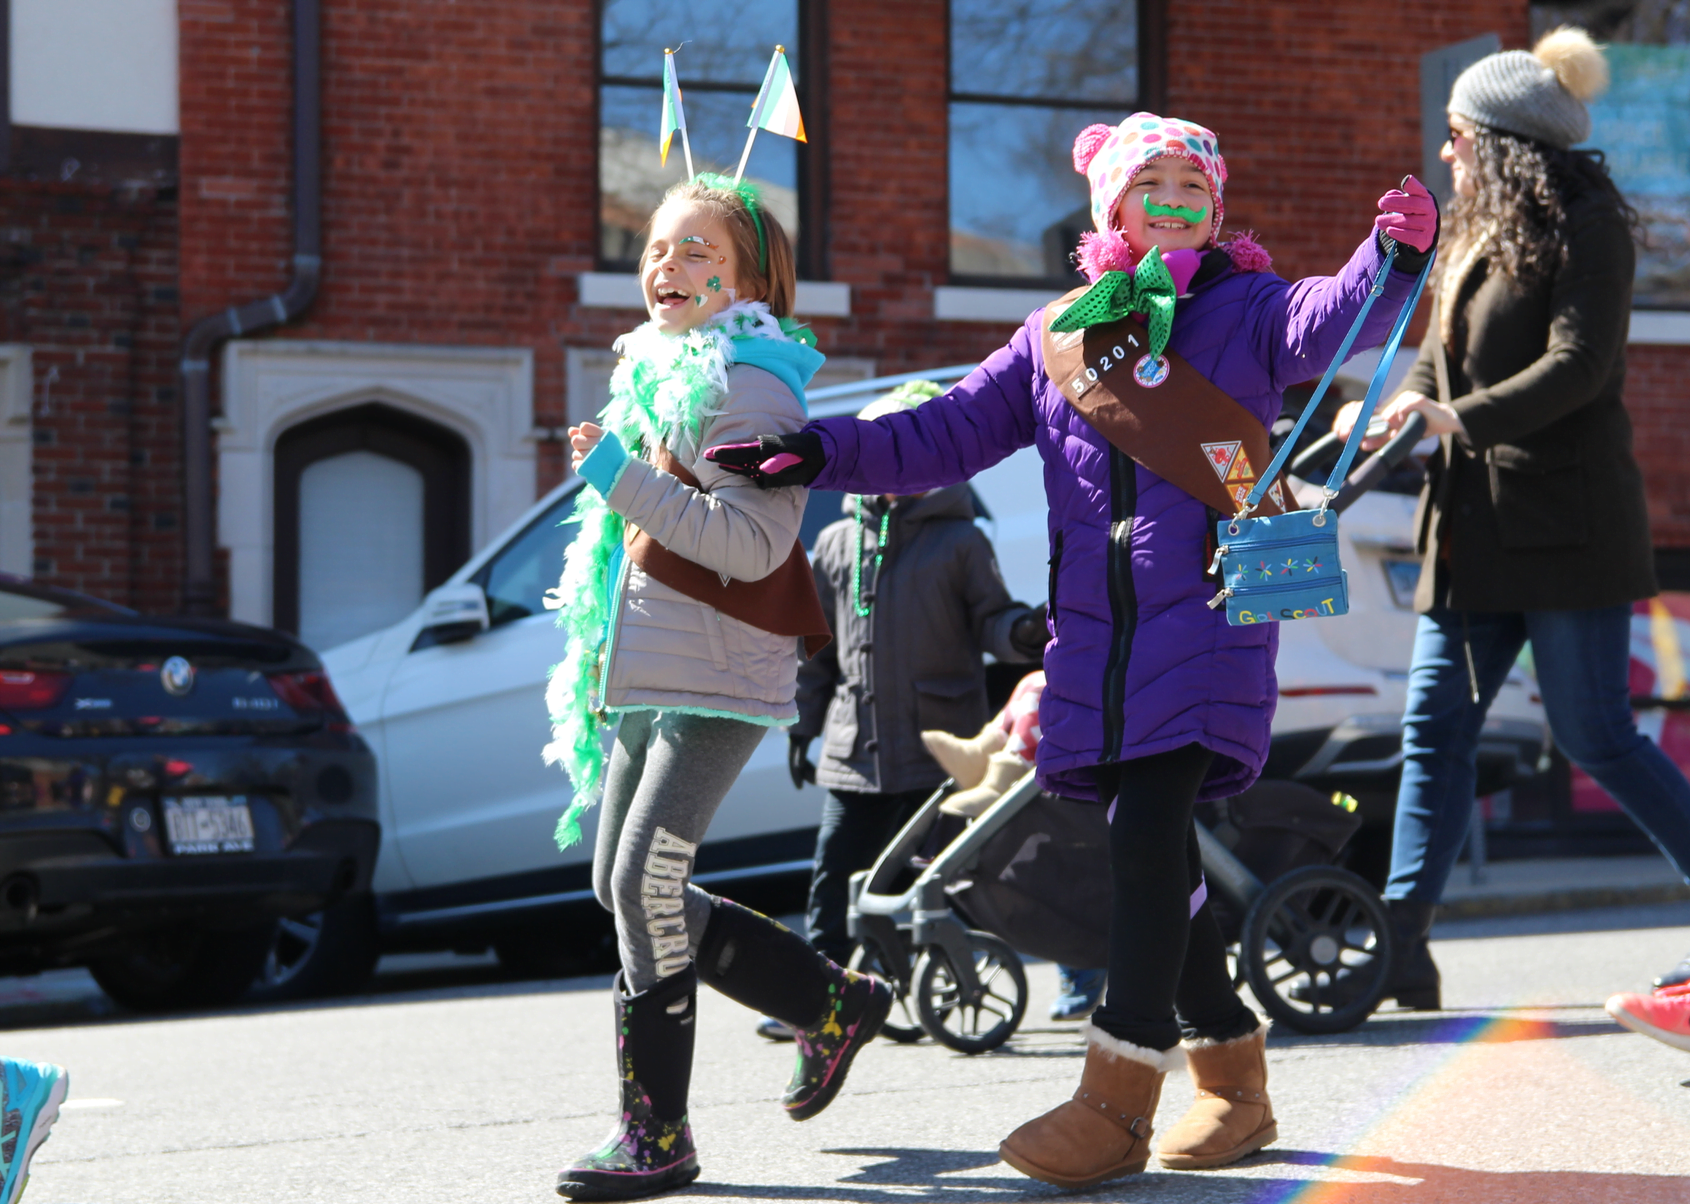 The 44th annual Greenwich St. Patrick’s Parade sponsored by the Greenwich Hibernian Association took place on Sunday, March 18.